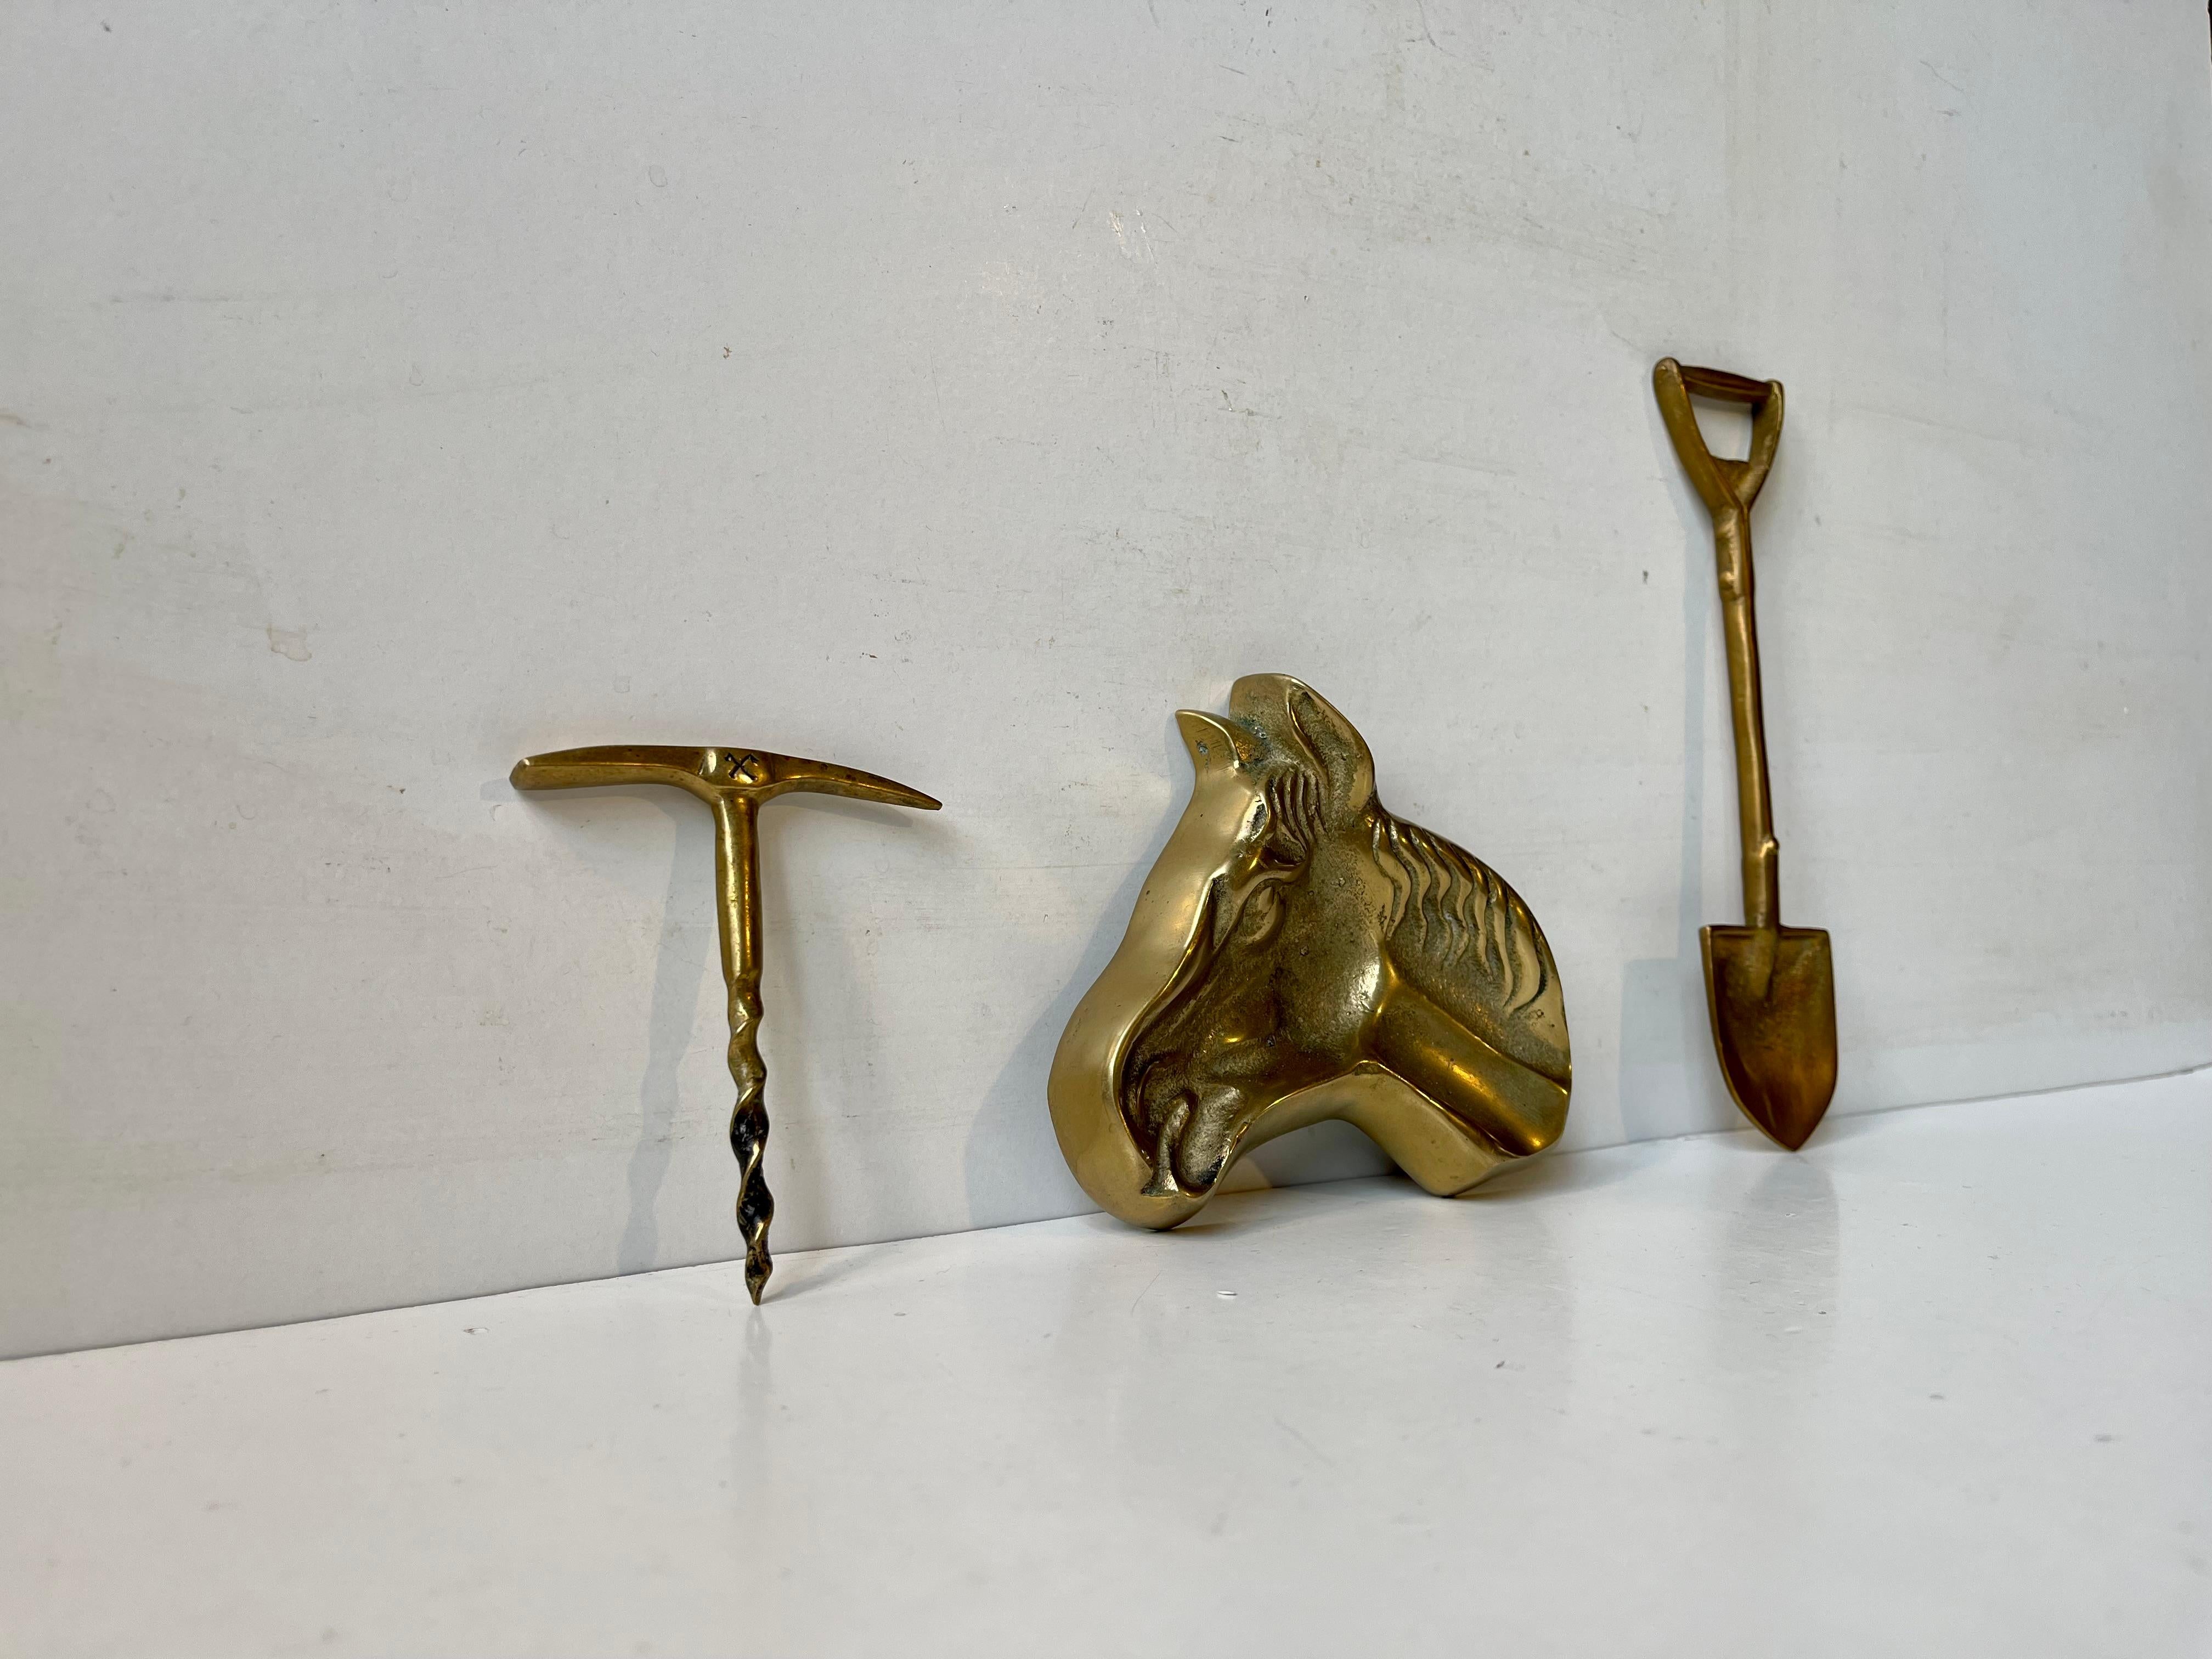 Midcentury bar-set with the following accessories: a rock hammer Corkscrew, a spade shaped bottle opener and a horse head ashtray. All of them made from solid brass. Scandinavian made circa 1960-70. Measurements: H: 9/17 cm (mallet/spade). The